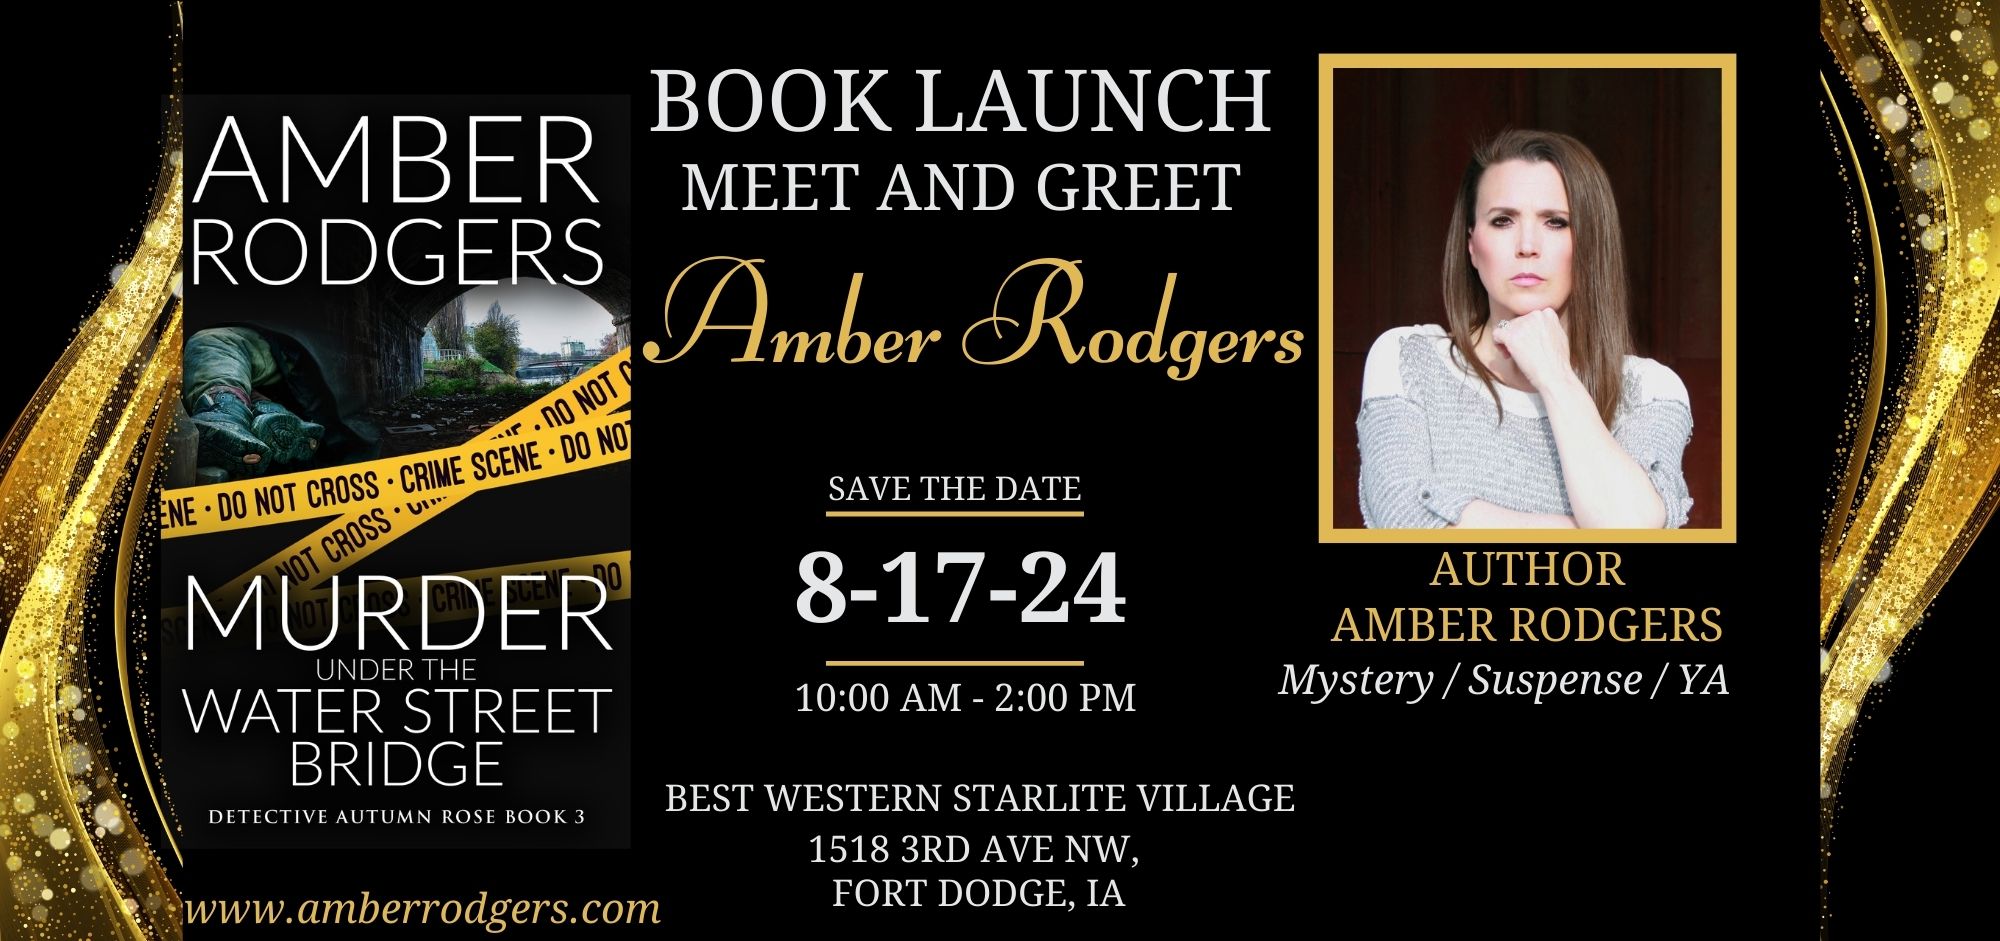 <h1 class="tribe-events-single-event-title">Author Amber Rodgers Book Signing/Meet & Greet</h1>